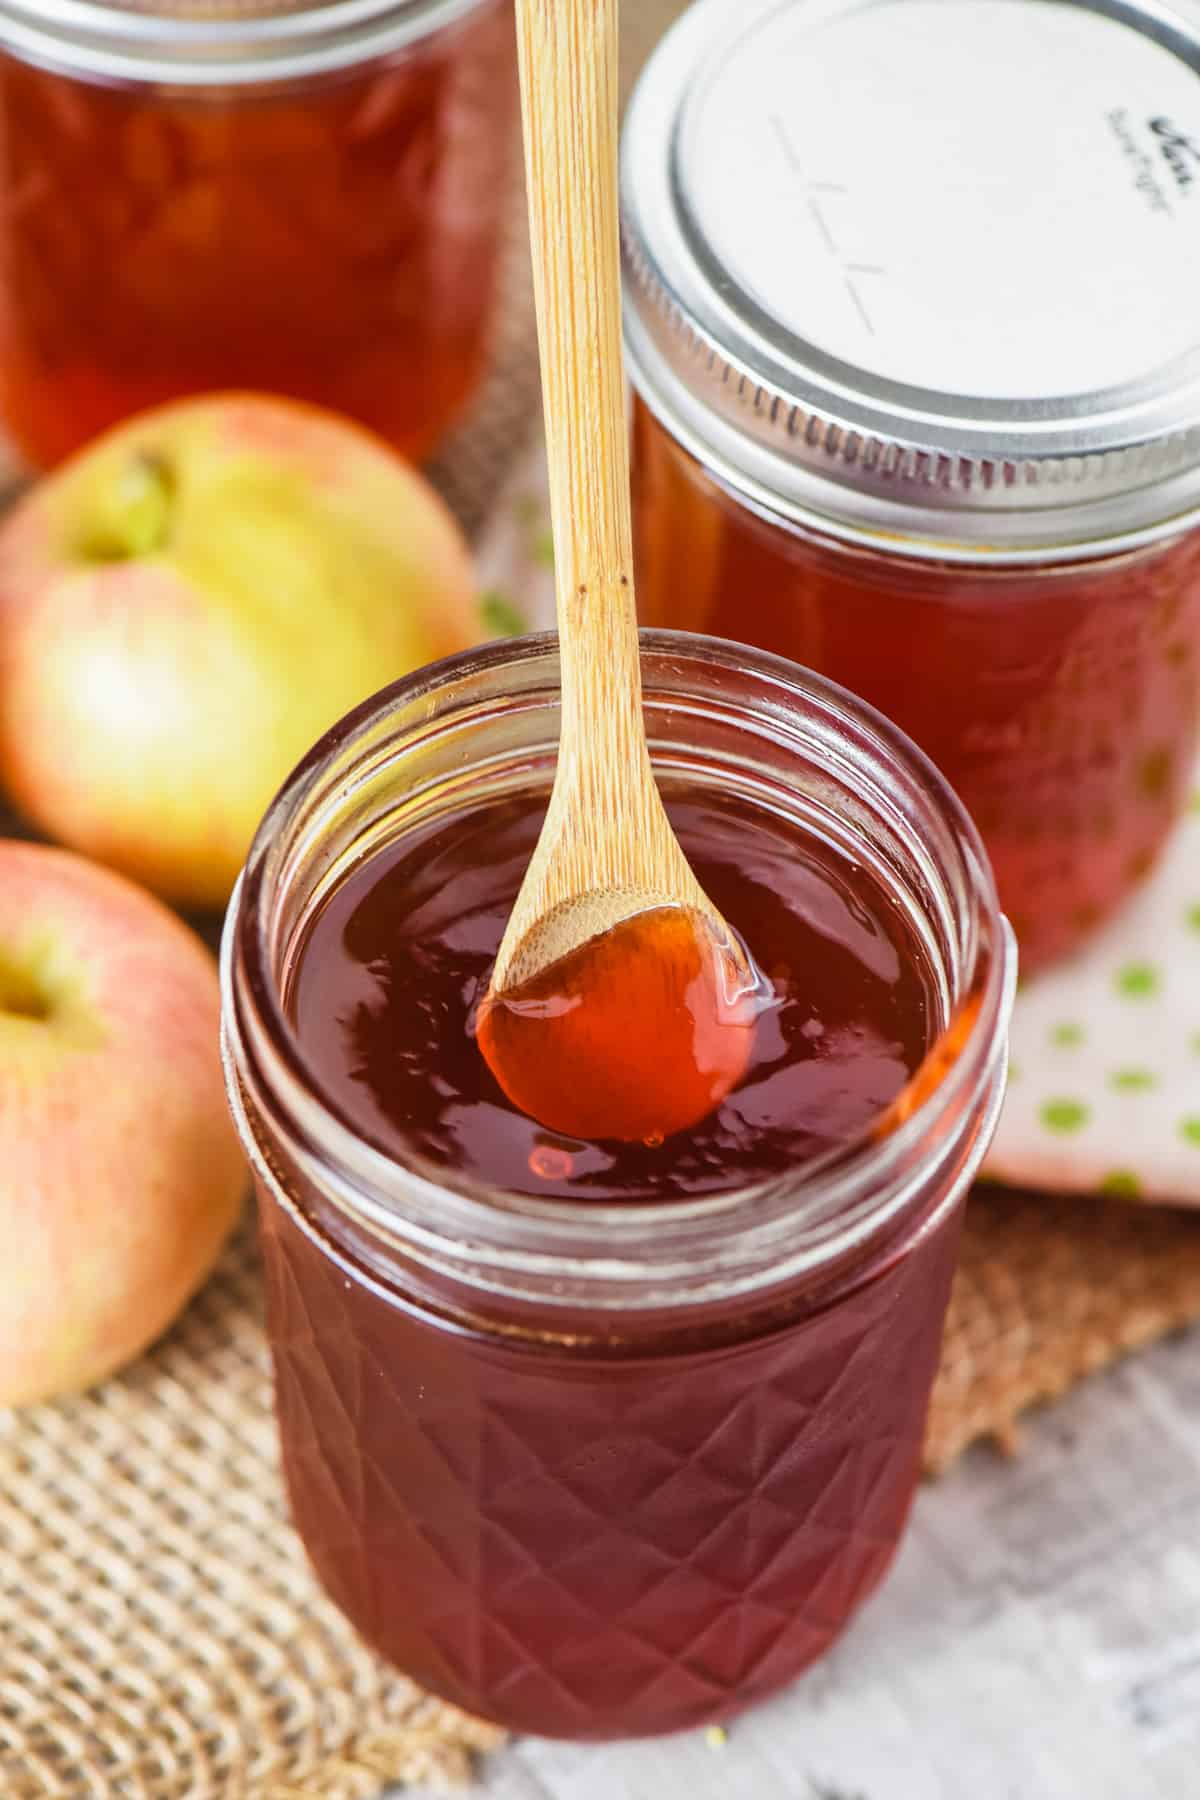 small wooden spoon in half pint jar of apple jelly with Gala apples